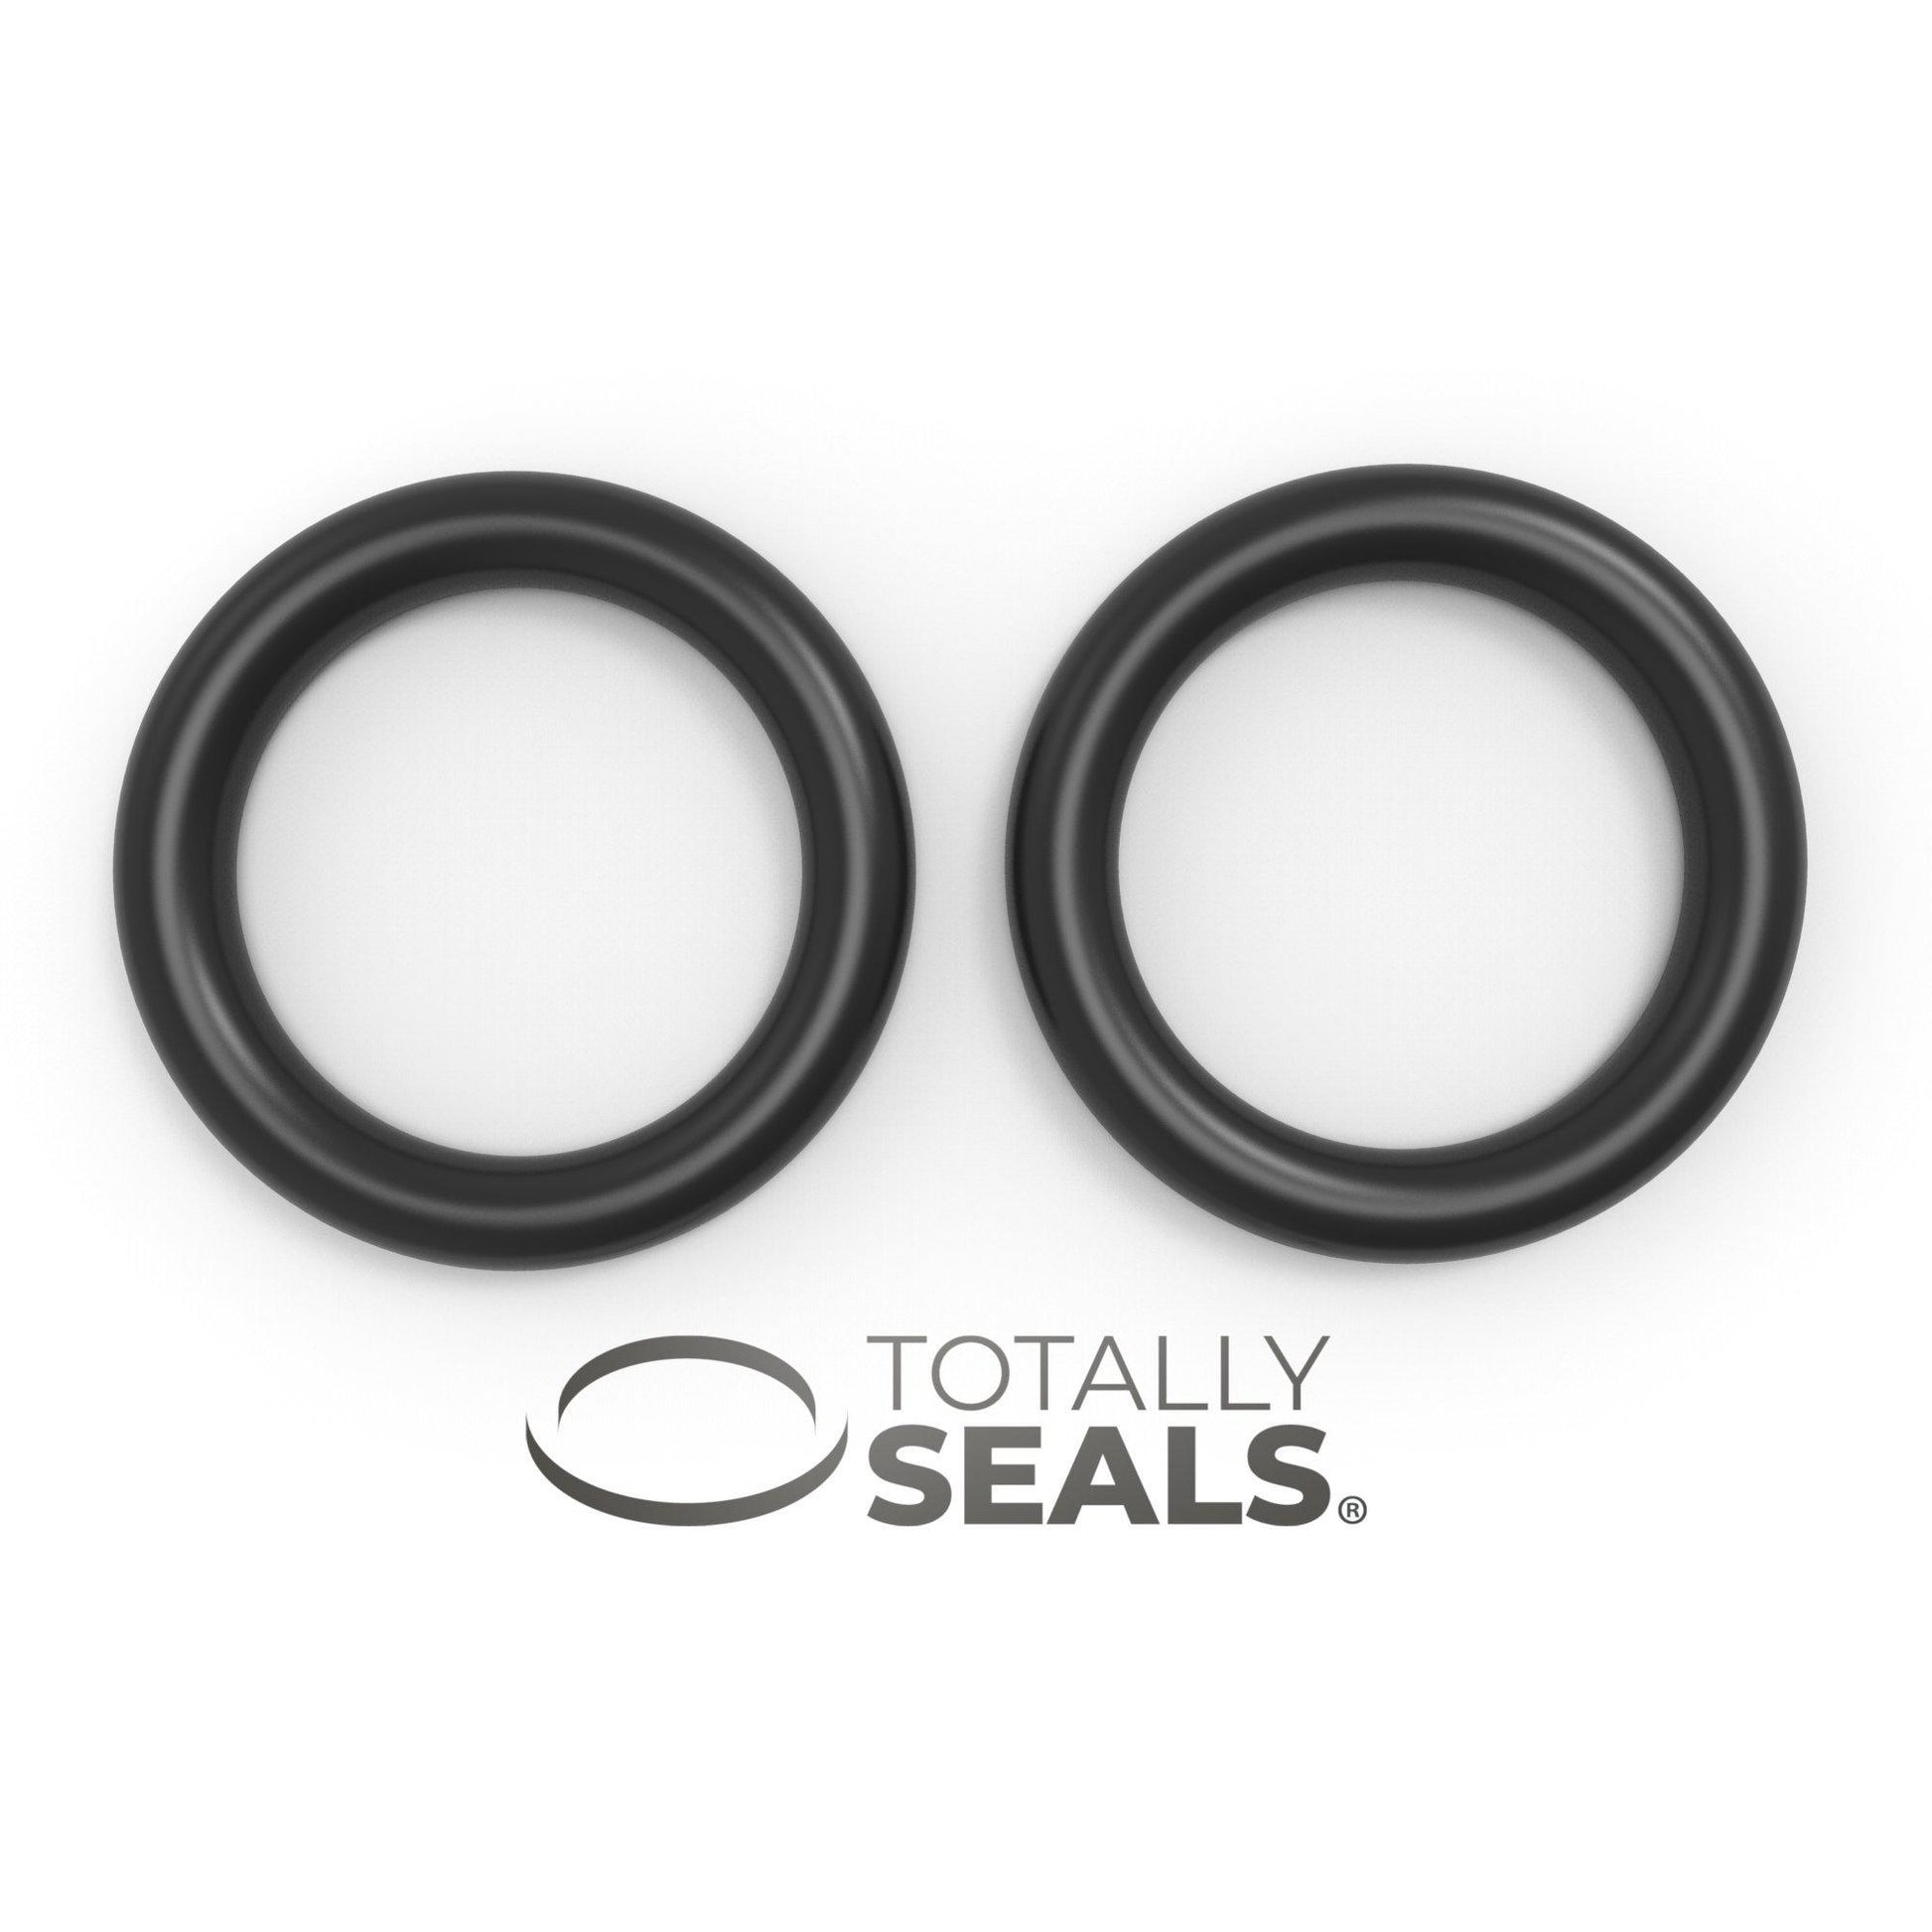 36mm x 2mm (40mm OD) Nitrile O-Rings - Totally Seals®